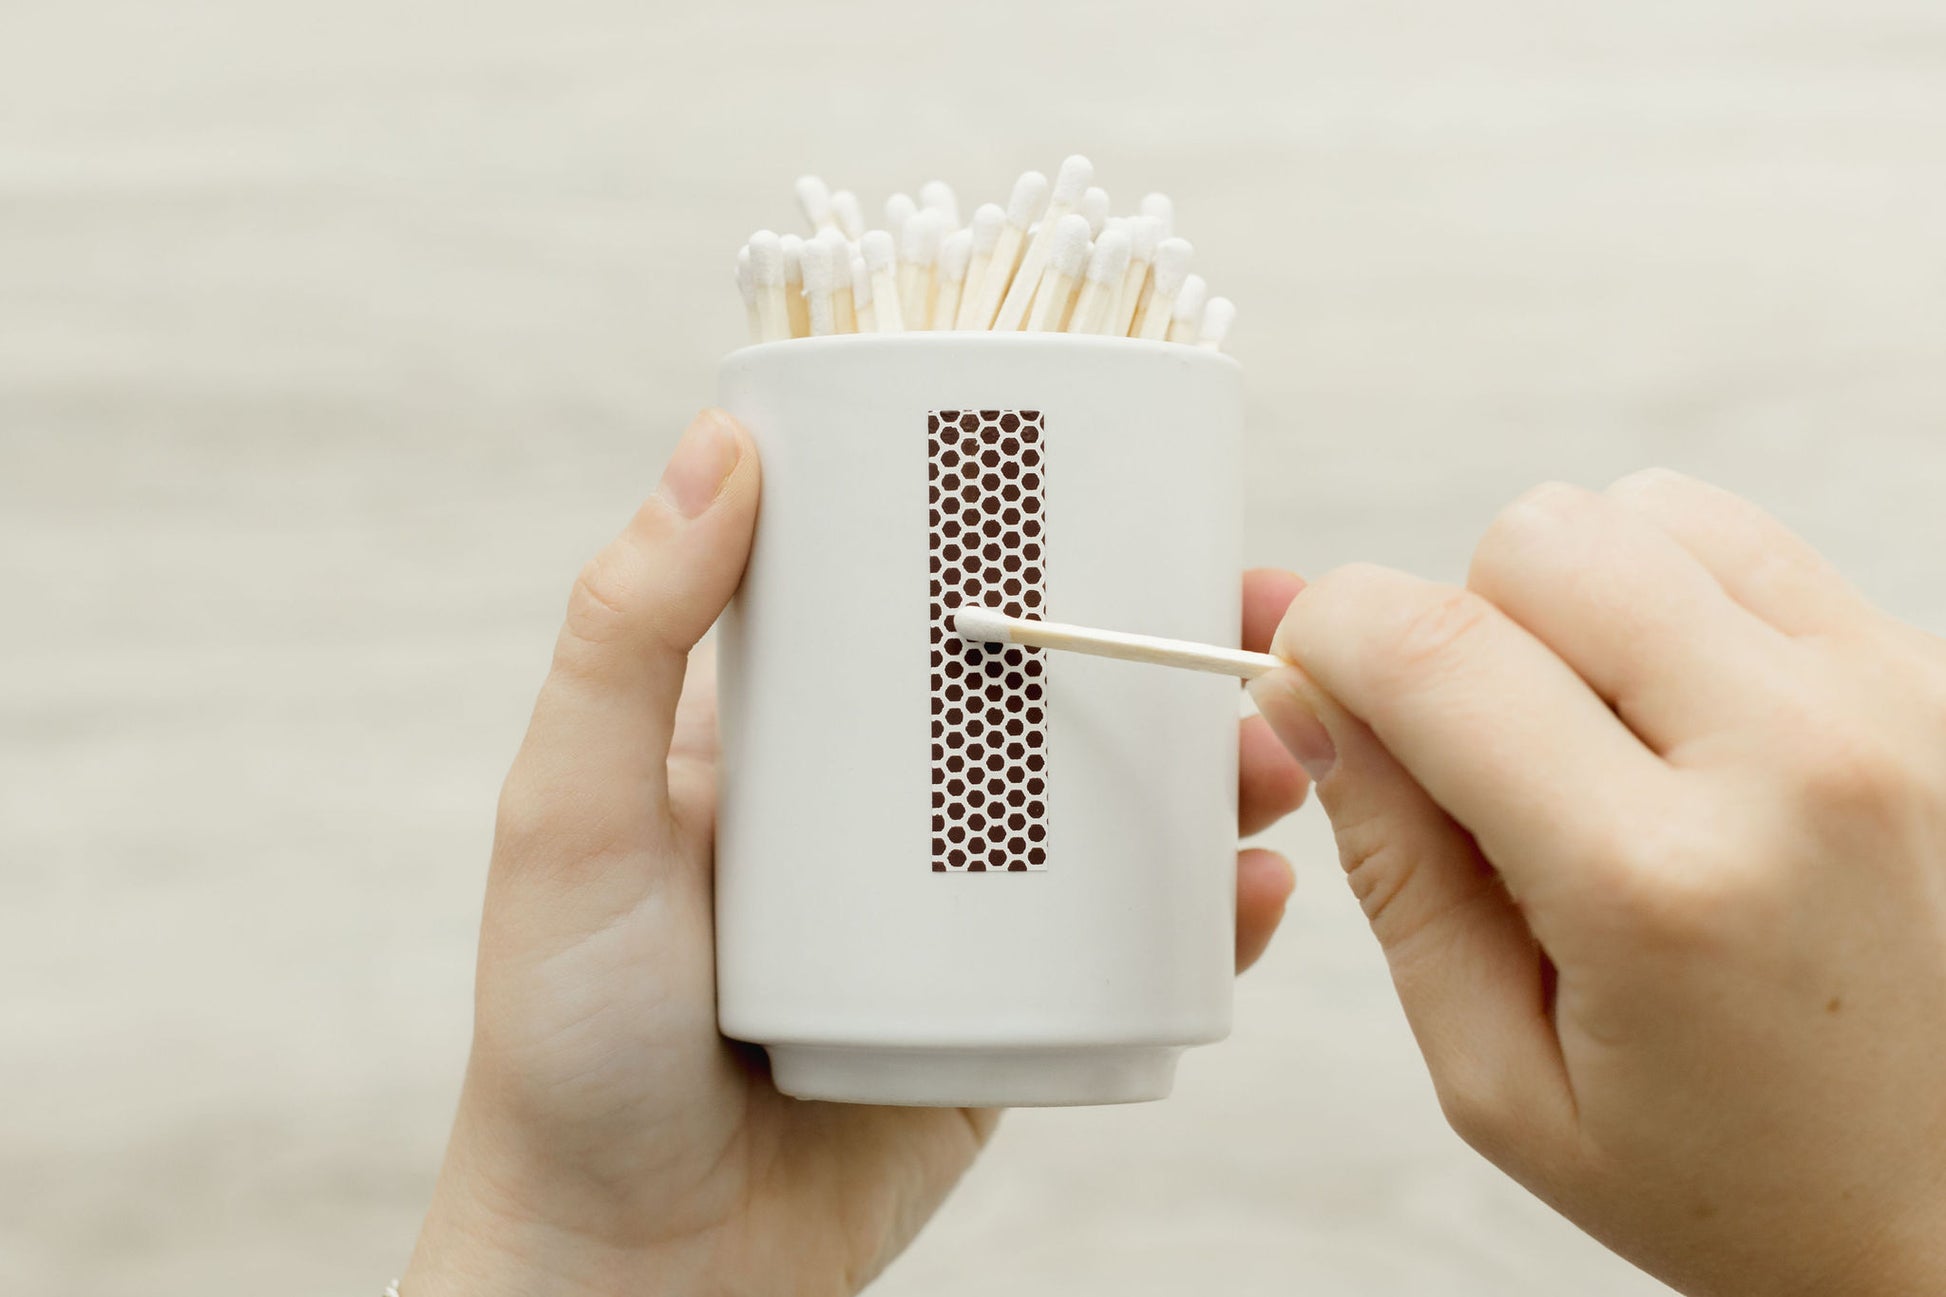 Match Holder with Colored Matches – Current Home NY